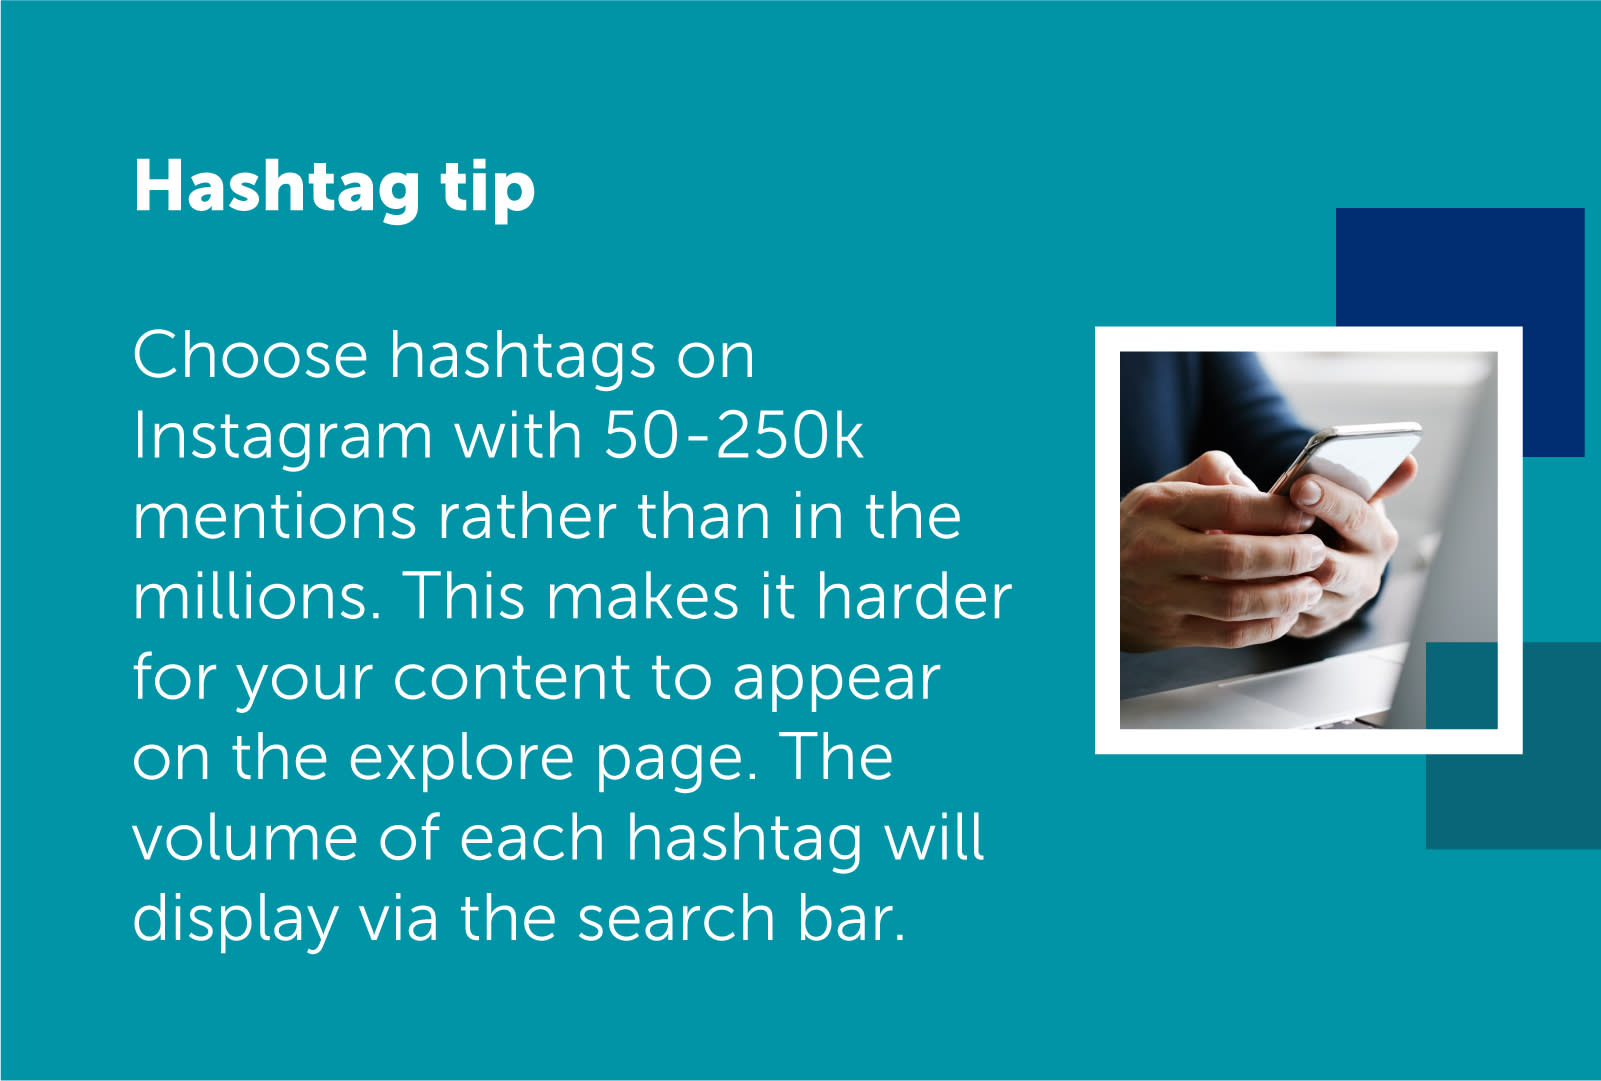 Text on image reads: Choose hashtags on Instagram with 50-250k mentions rather than in the millions. This makes it harder for your content to appear on the explore page. The volume of each hashtag with display via the search bar. 